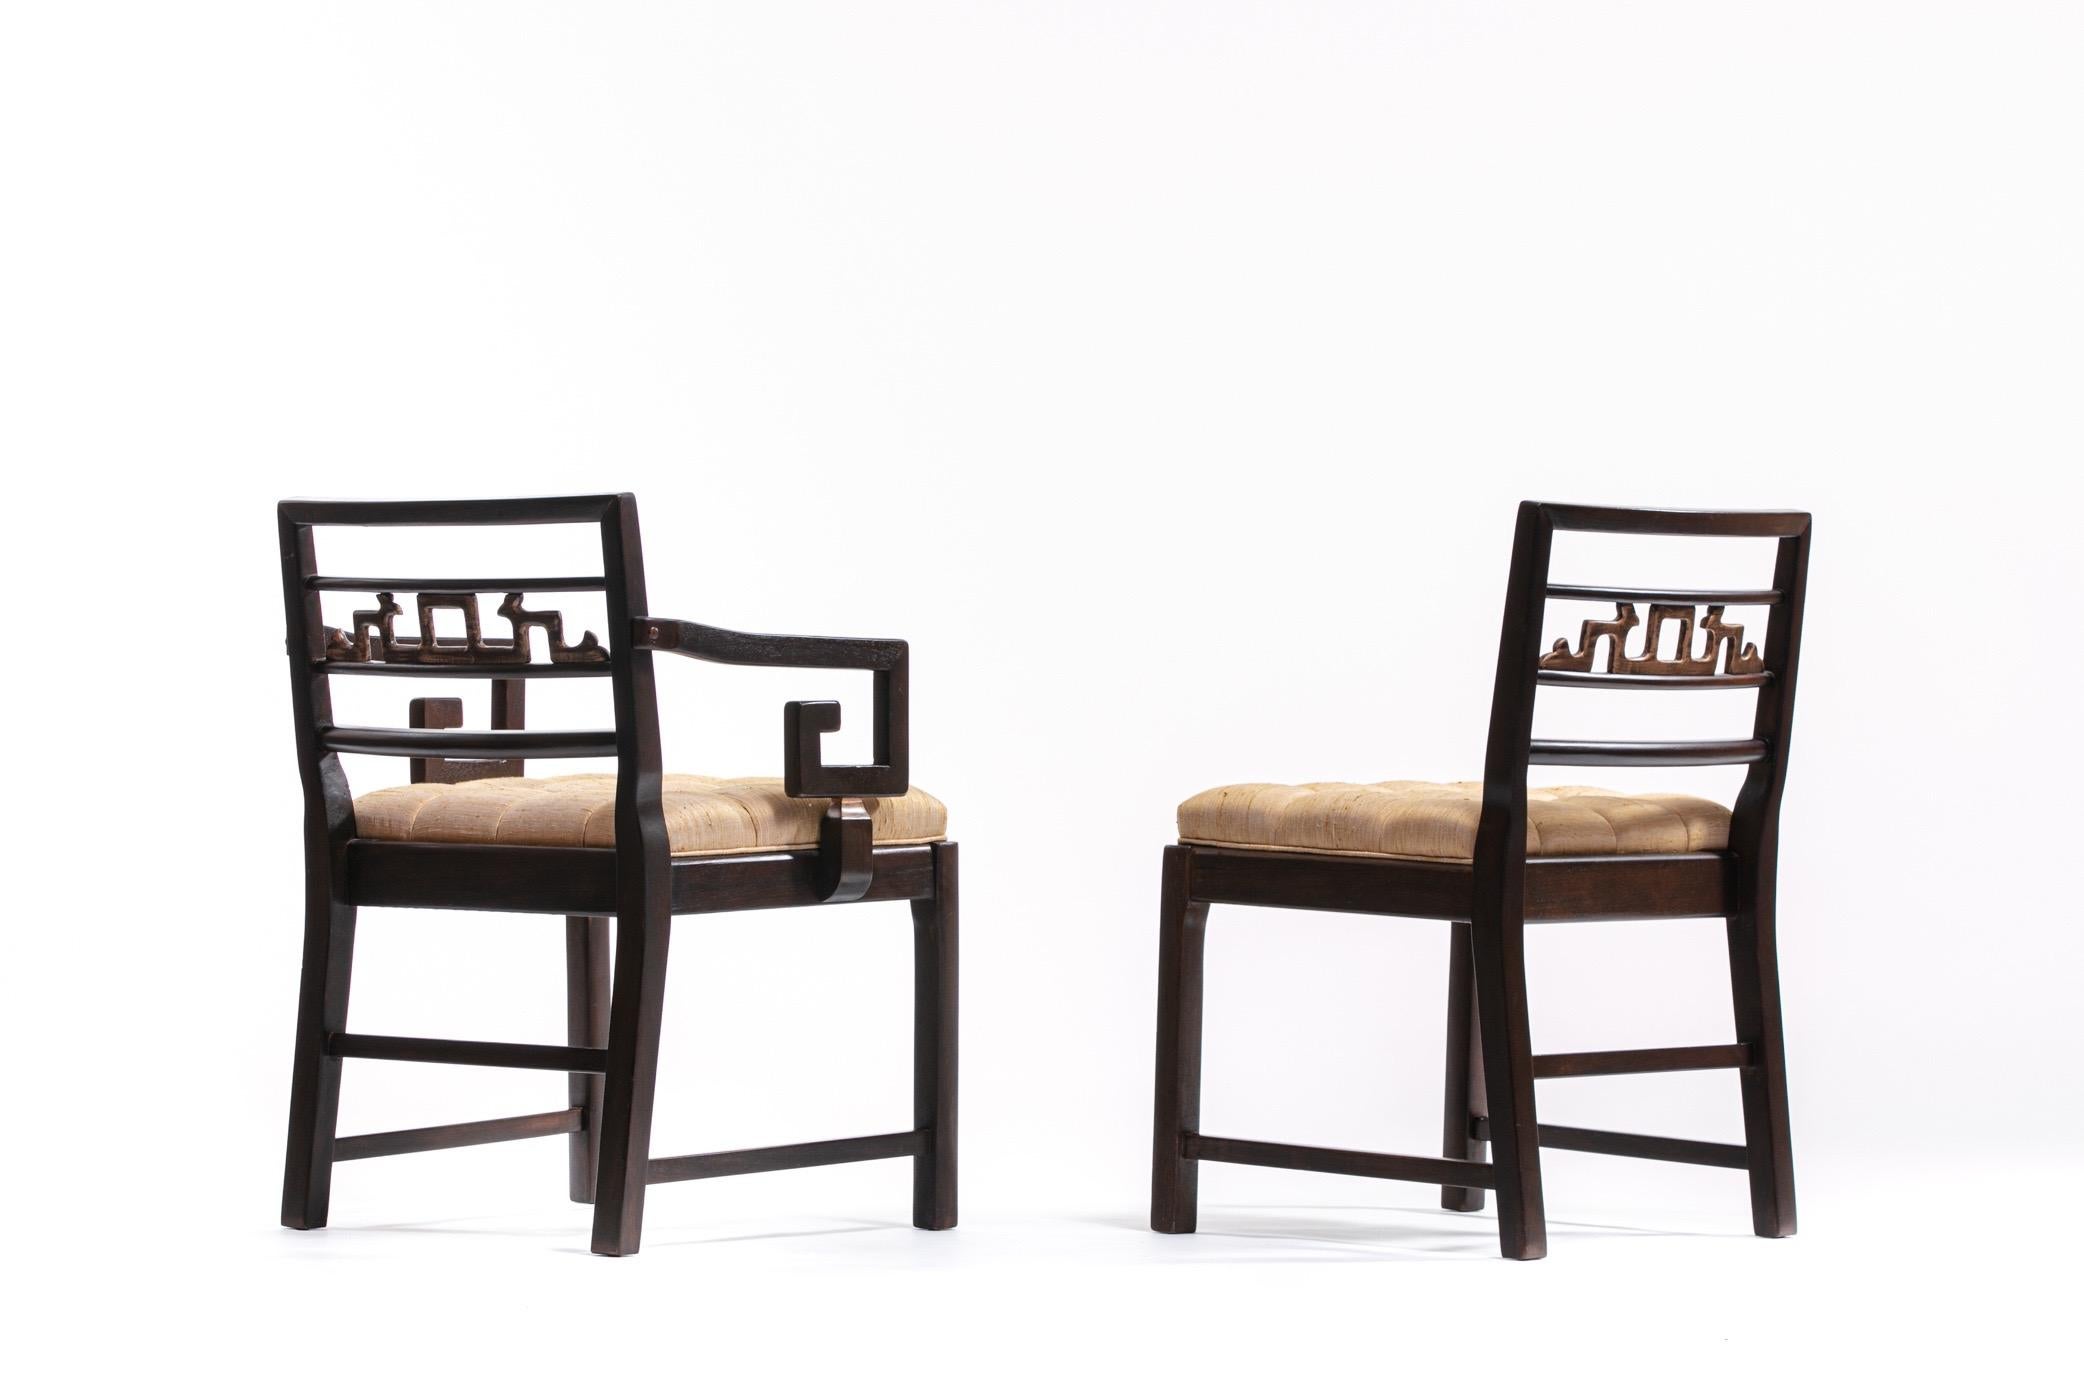 Attributed to designer Michael Taylor, this large set of ten Baker Asian inspired chinoiserie dining chairs is the only one of its kind available, globally. These unique dining chairs were completely restored from top to bottom. Mahogany frames were